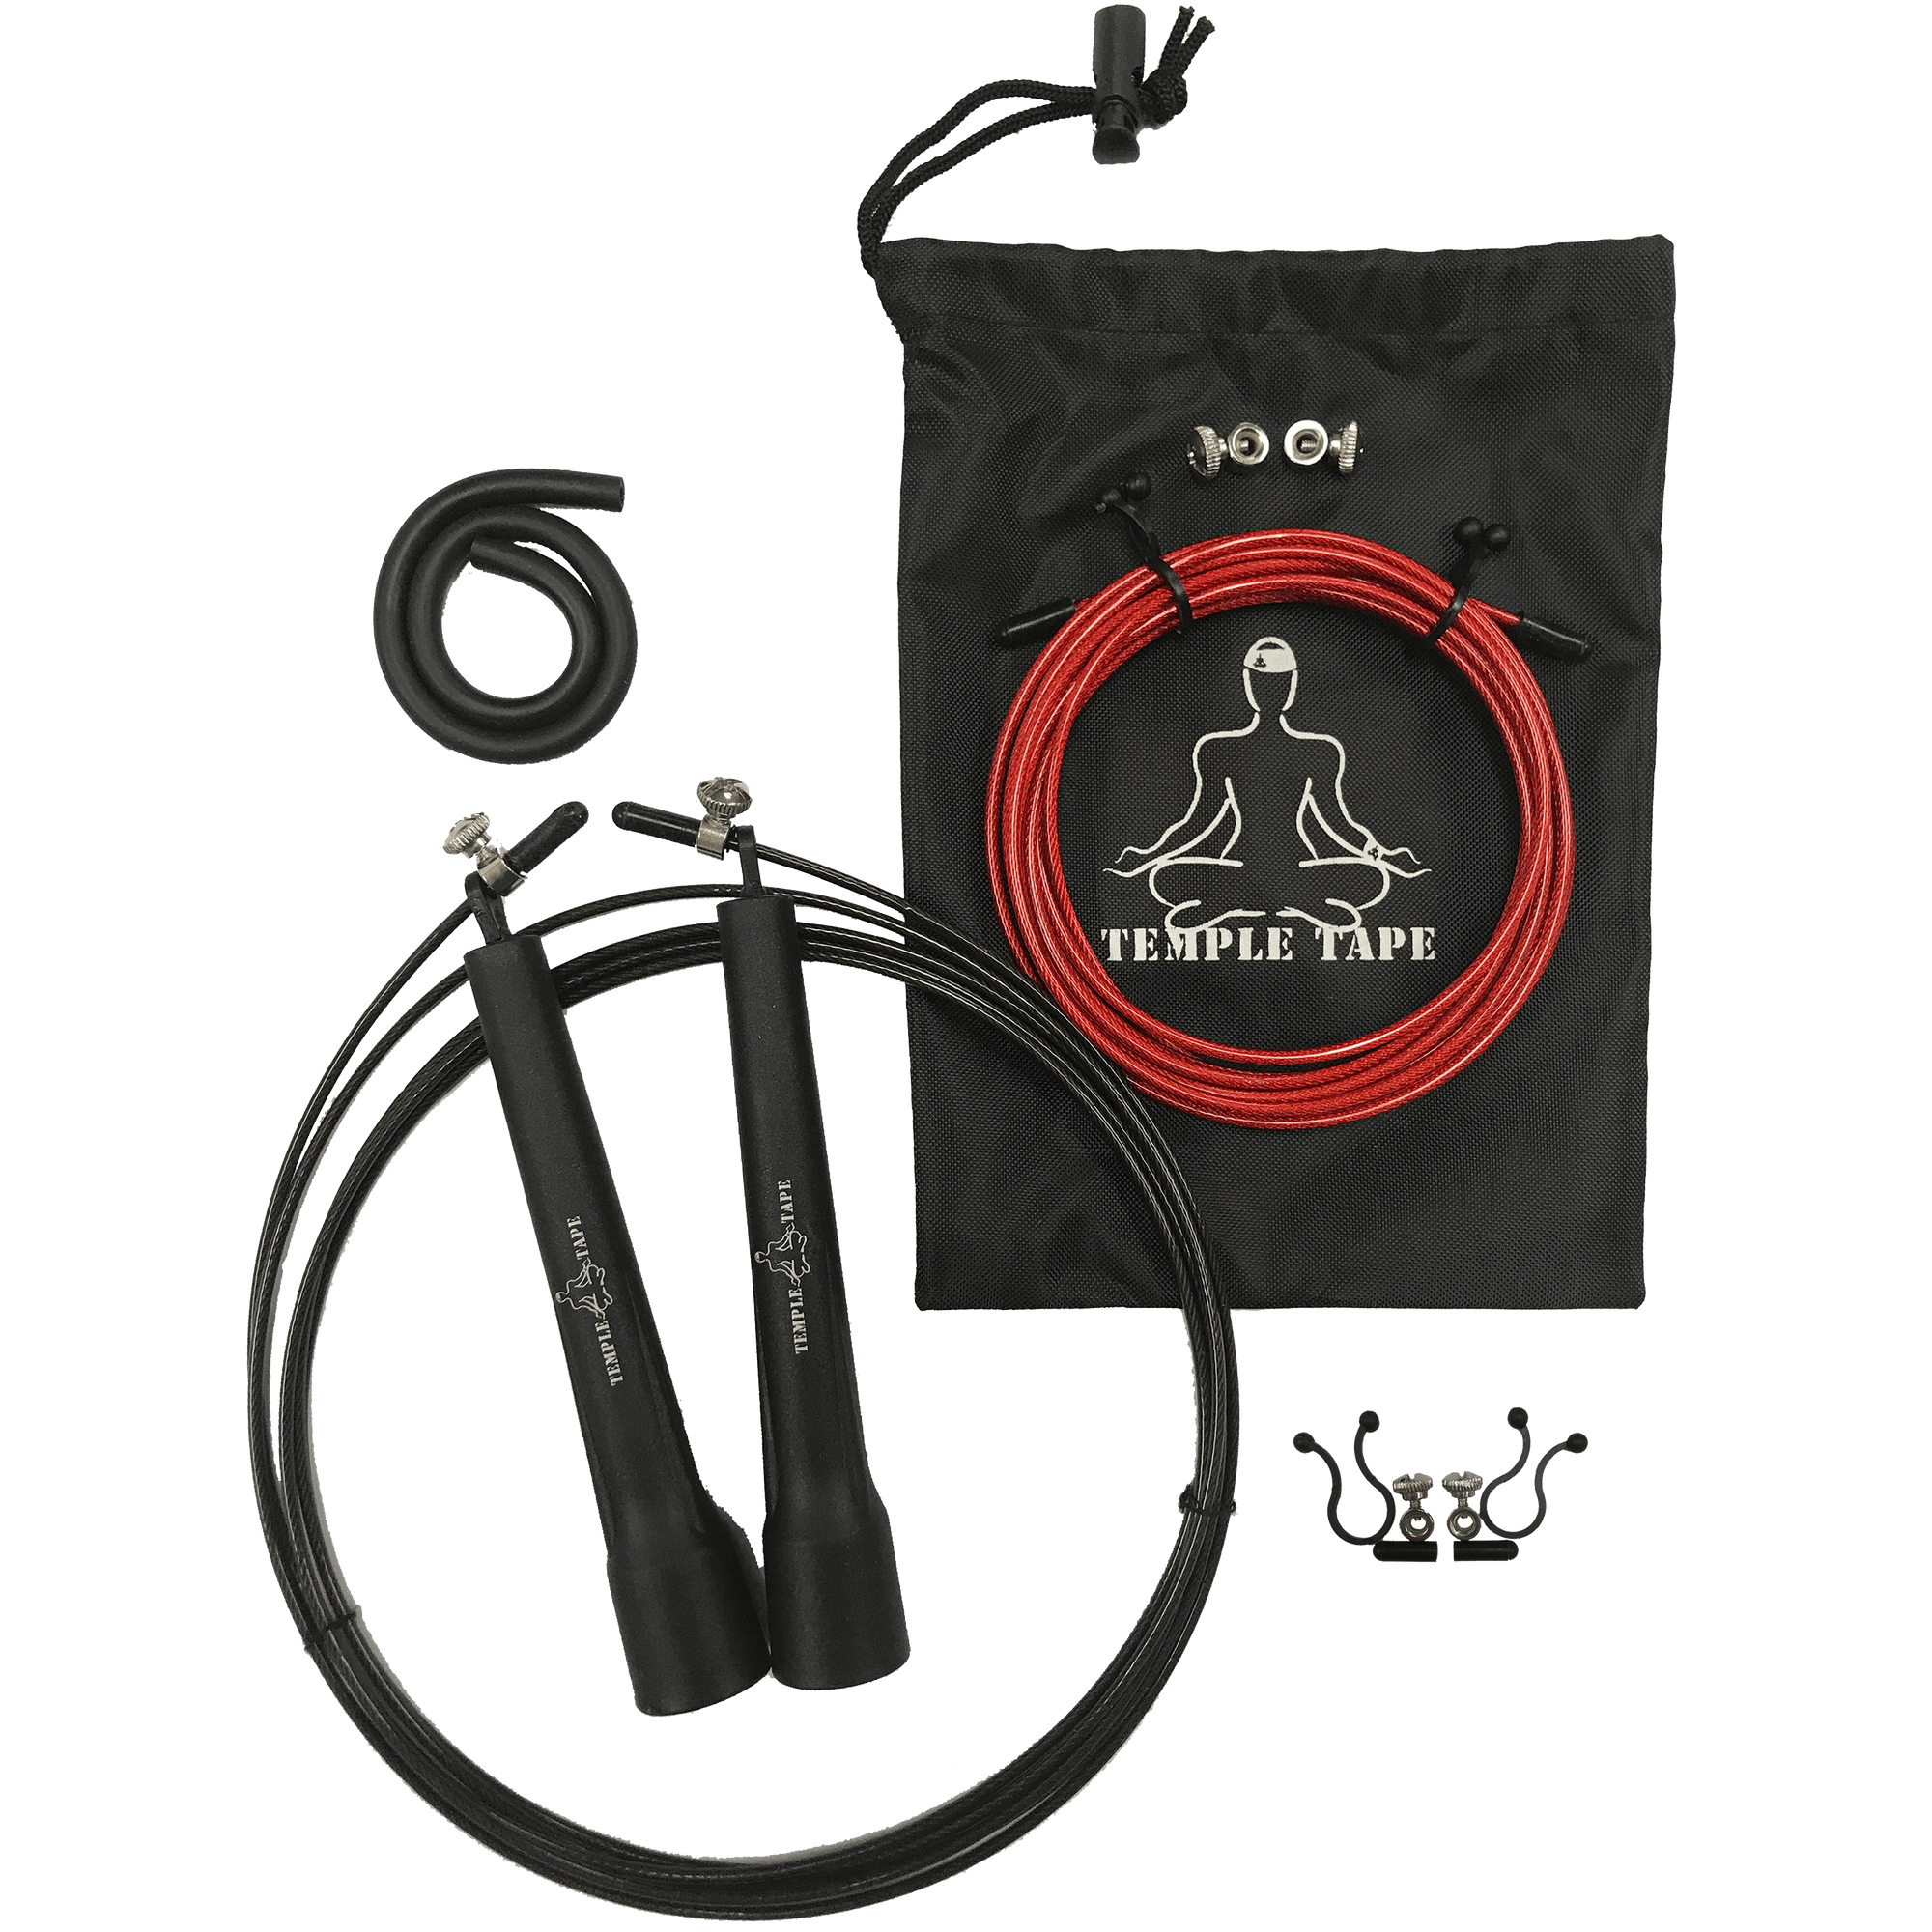 Premium Speed Jump Rope bundle - includes 2 Adjustable ropes, Carry Bag and Extra Parts